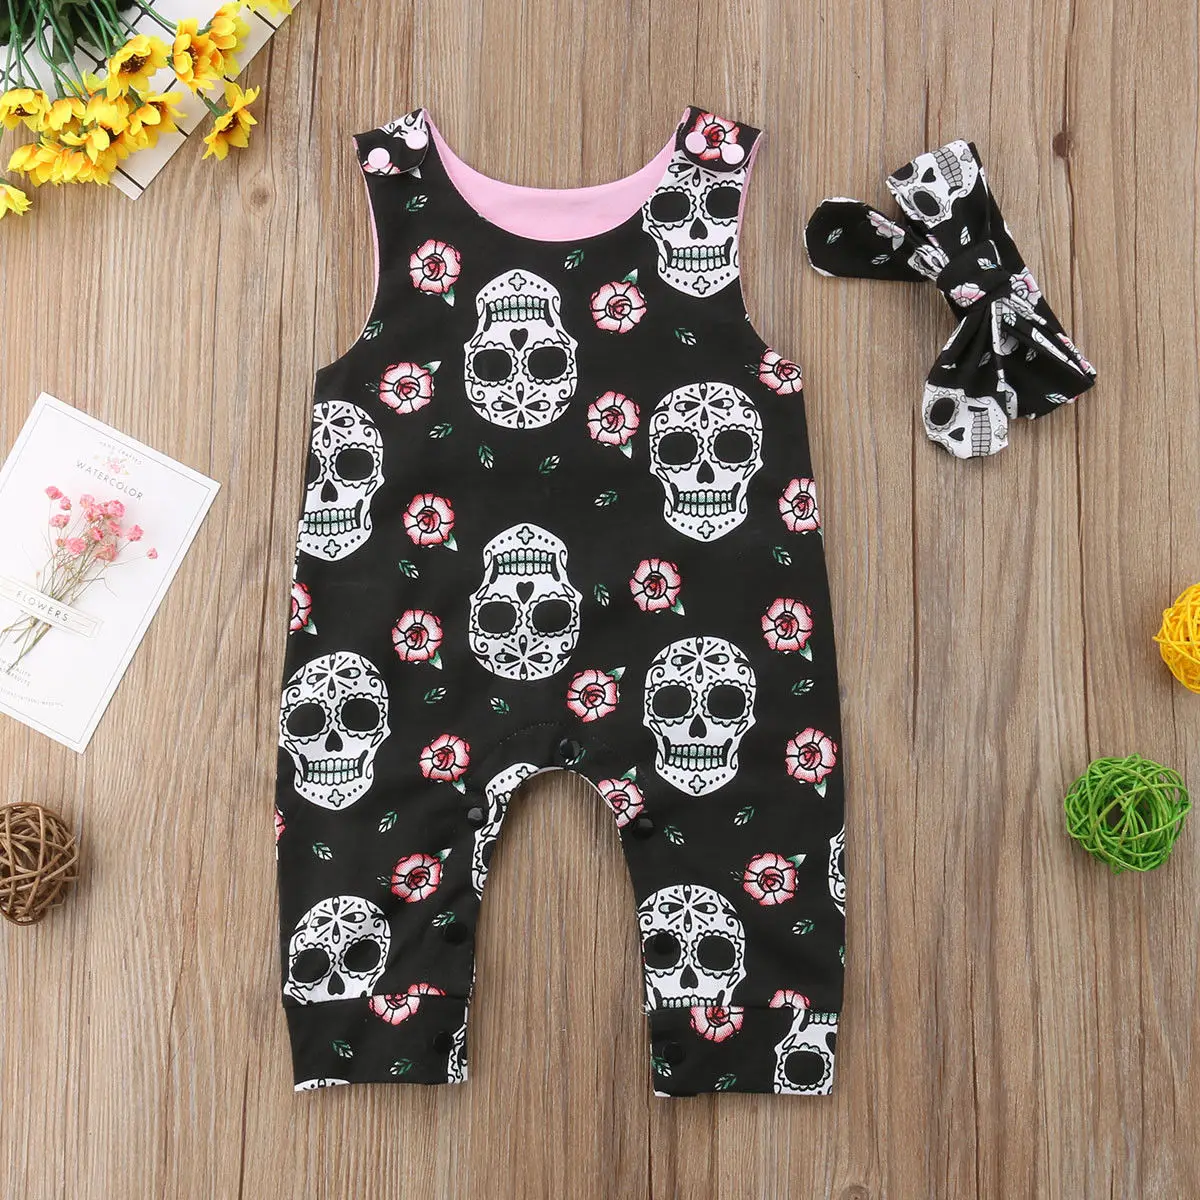 

Girl’s Halloween Skull Printed Romper Sets Sleeveless Snap Button Crotch Strap Bodysuit with Printed Bow Hairband